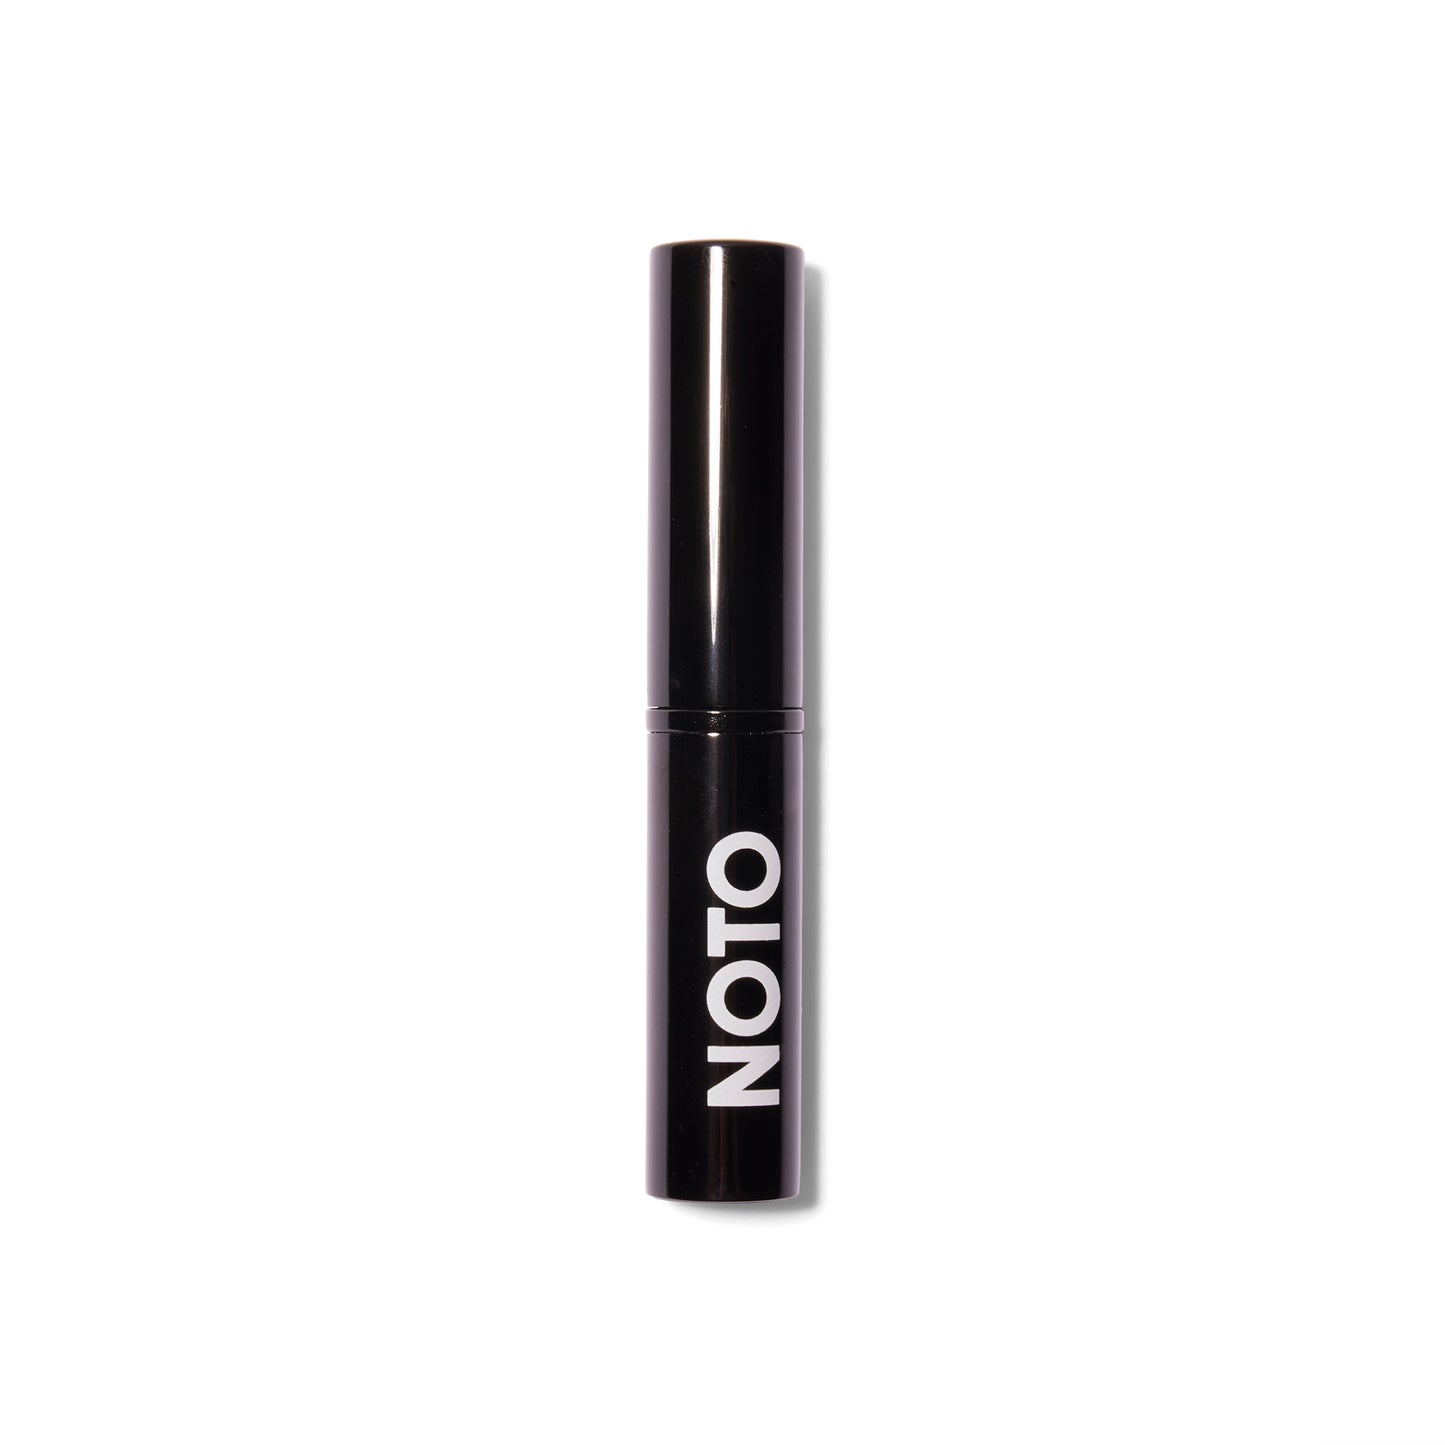 Front view of the Noto Organics Hydra Highlighter. The component is black with a white logo and the top is on the tube. 